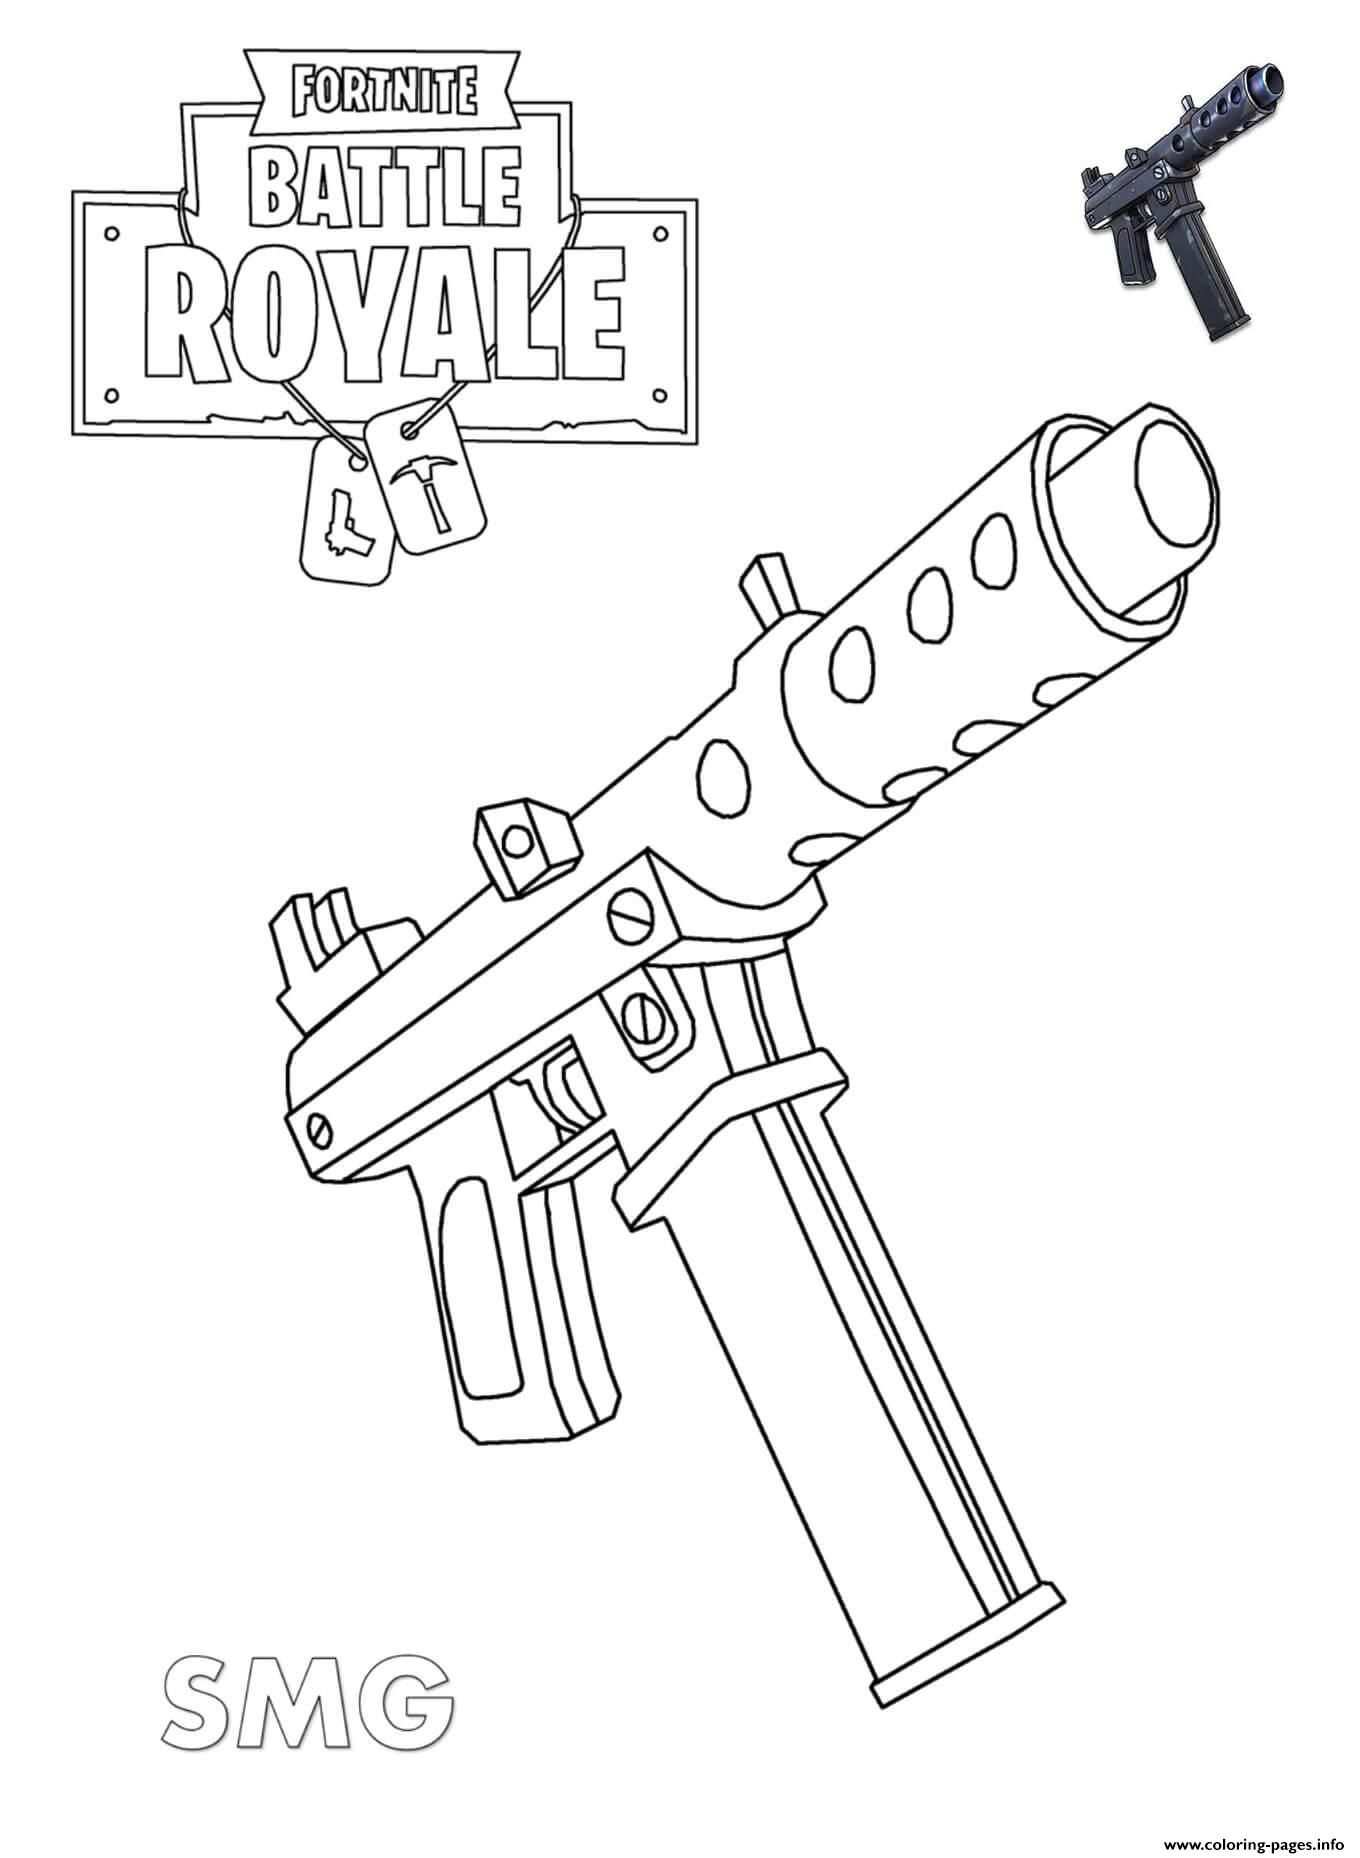 Print Machine Pistol Fortnite Coloring Pages With Images